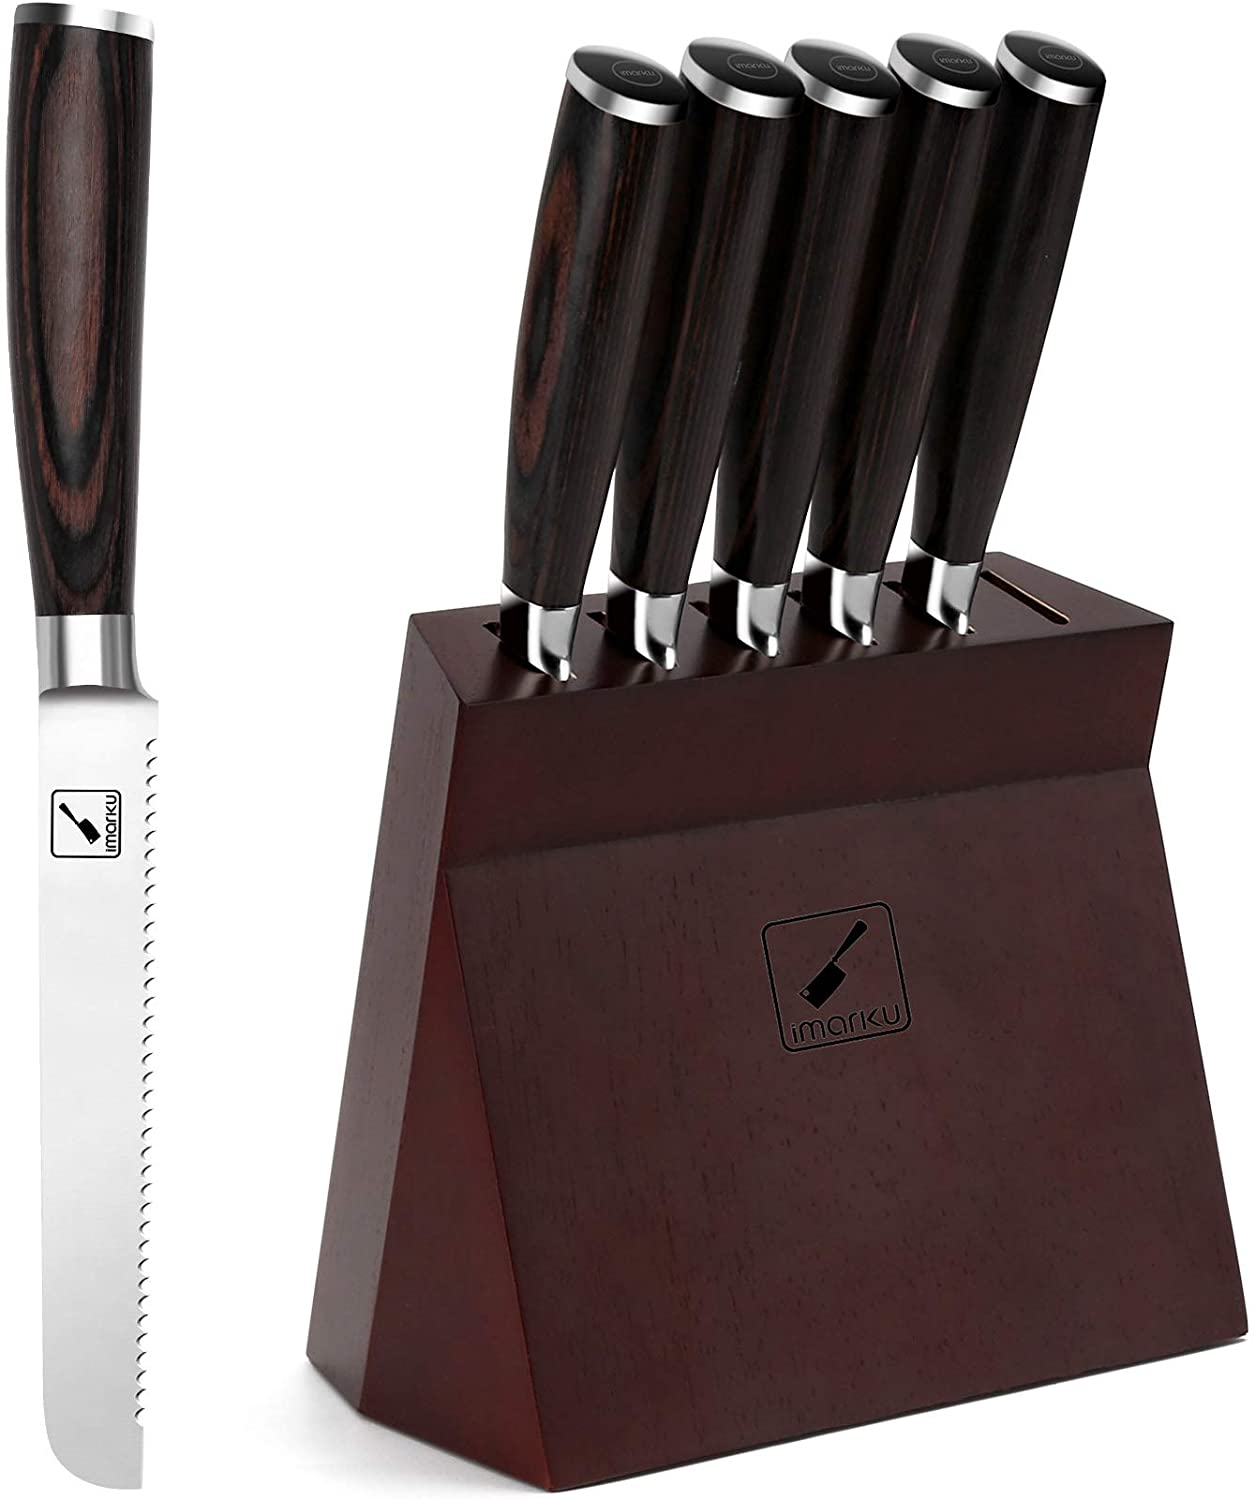 Steak Knives Set of 6,imarku Serrated Steak Knives with Block,High Carbon Stainless Steel Steak Knife Set with Pakkawood Handle